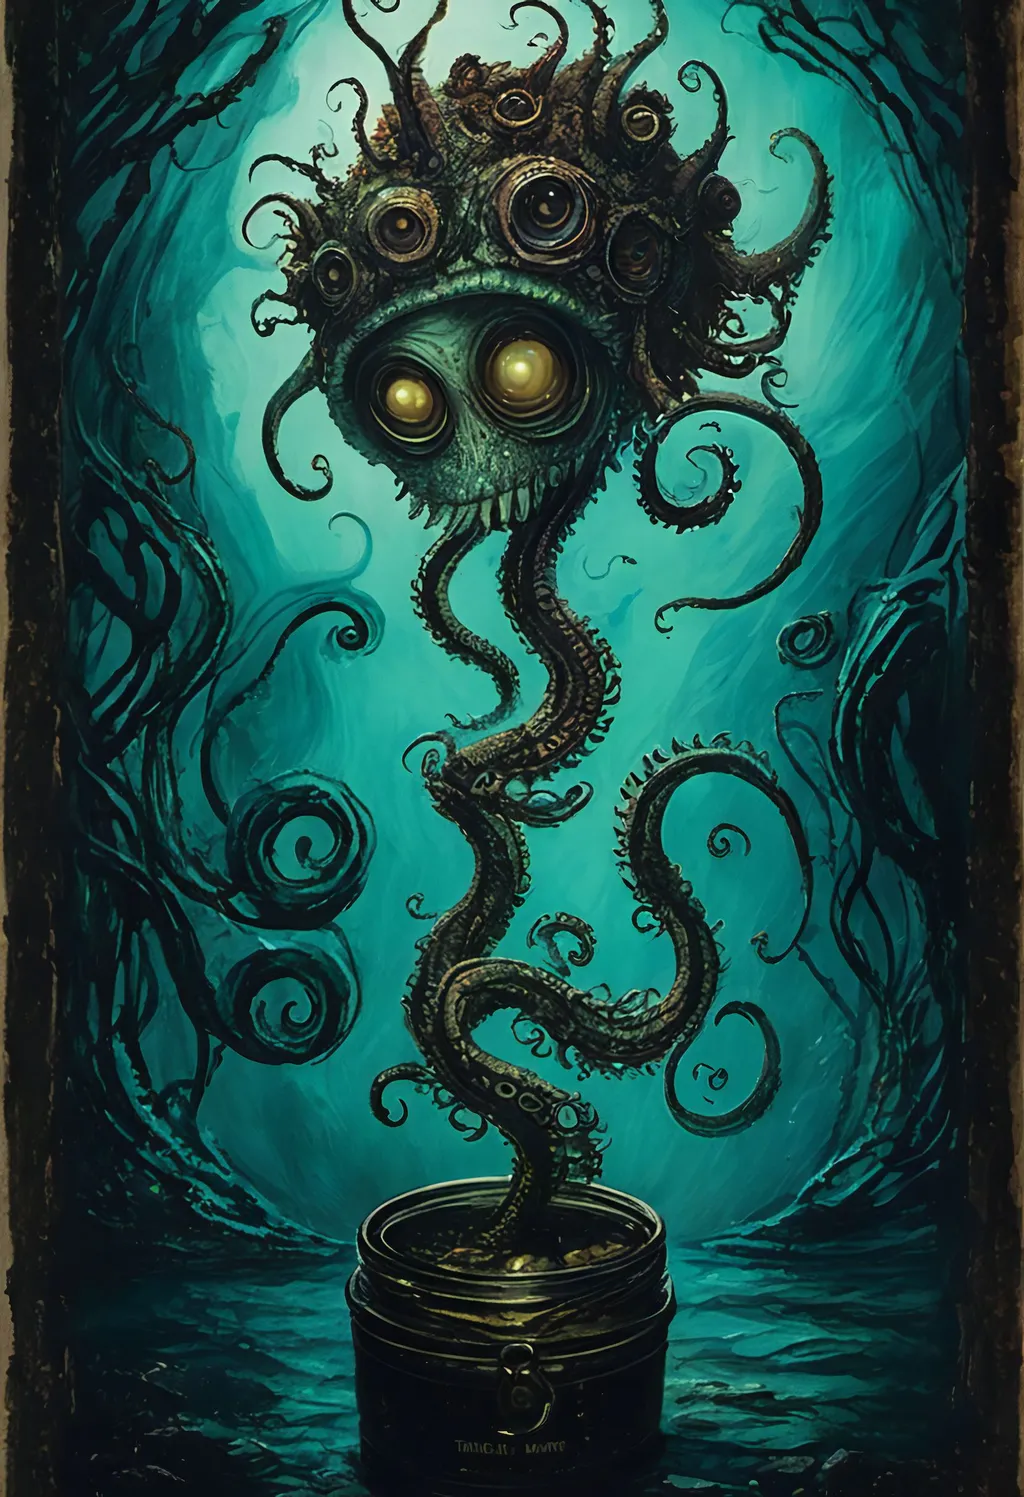 Prompt: small realistic lovecraftian horror monster by Guillermo del Toro trapped in a jar, ↑ ★★★★☆ ✦✦✦✦✦, taschen, TIFF